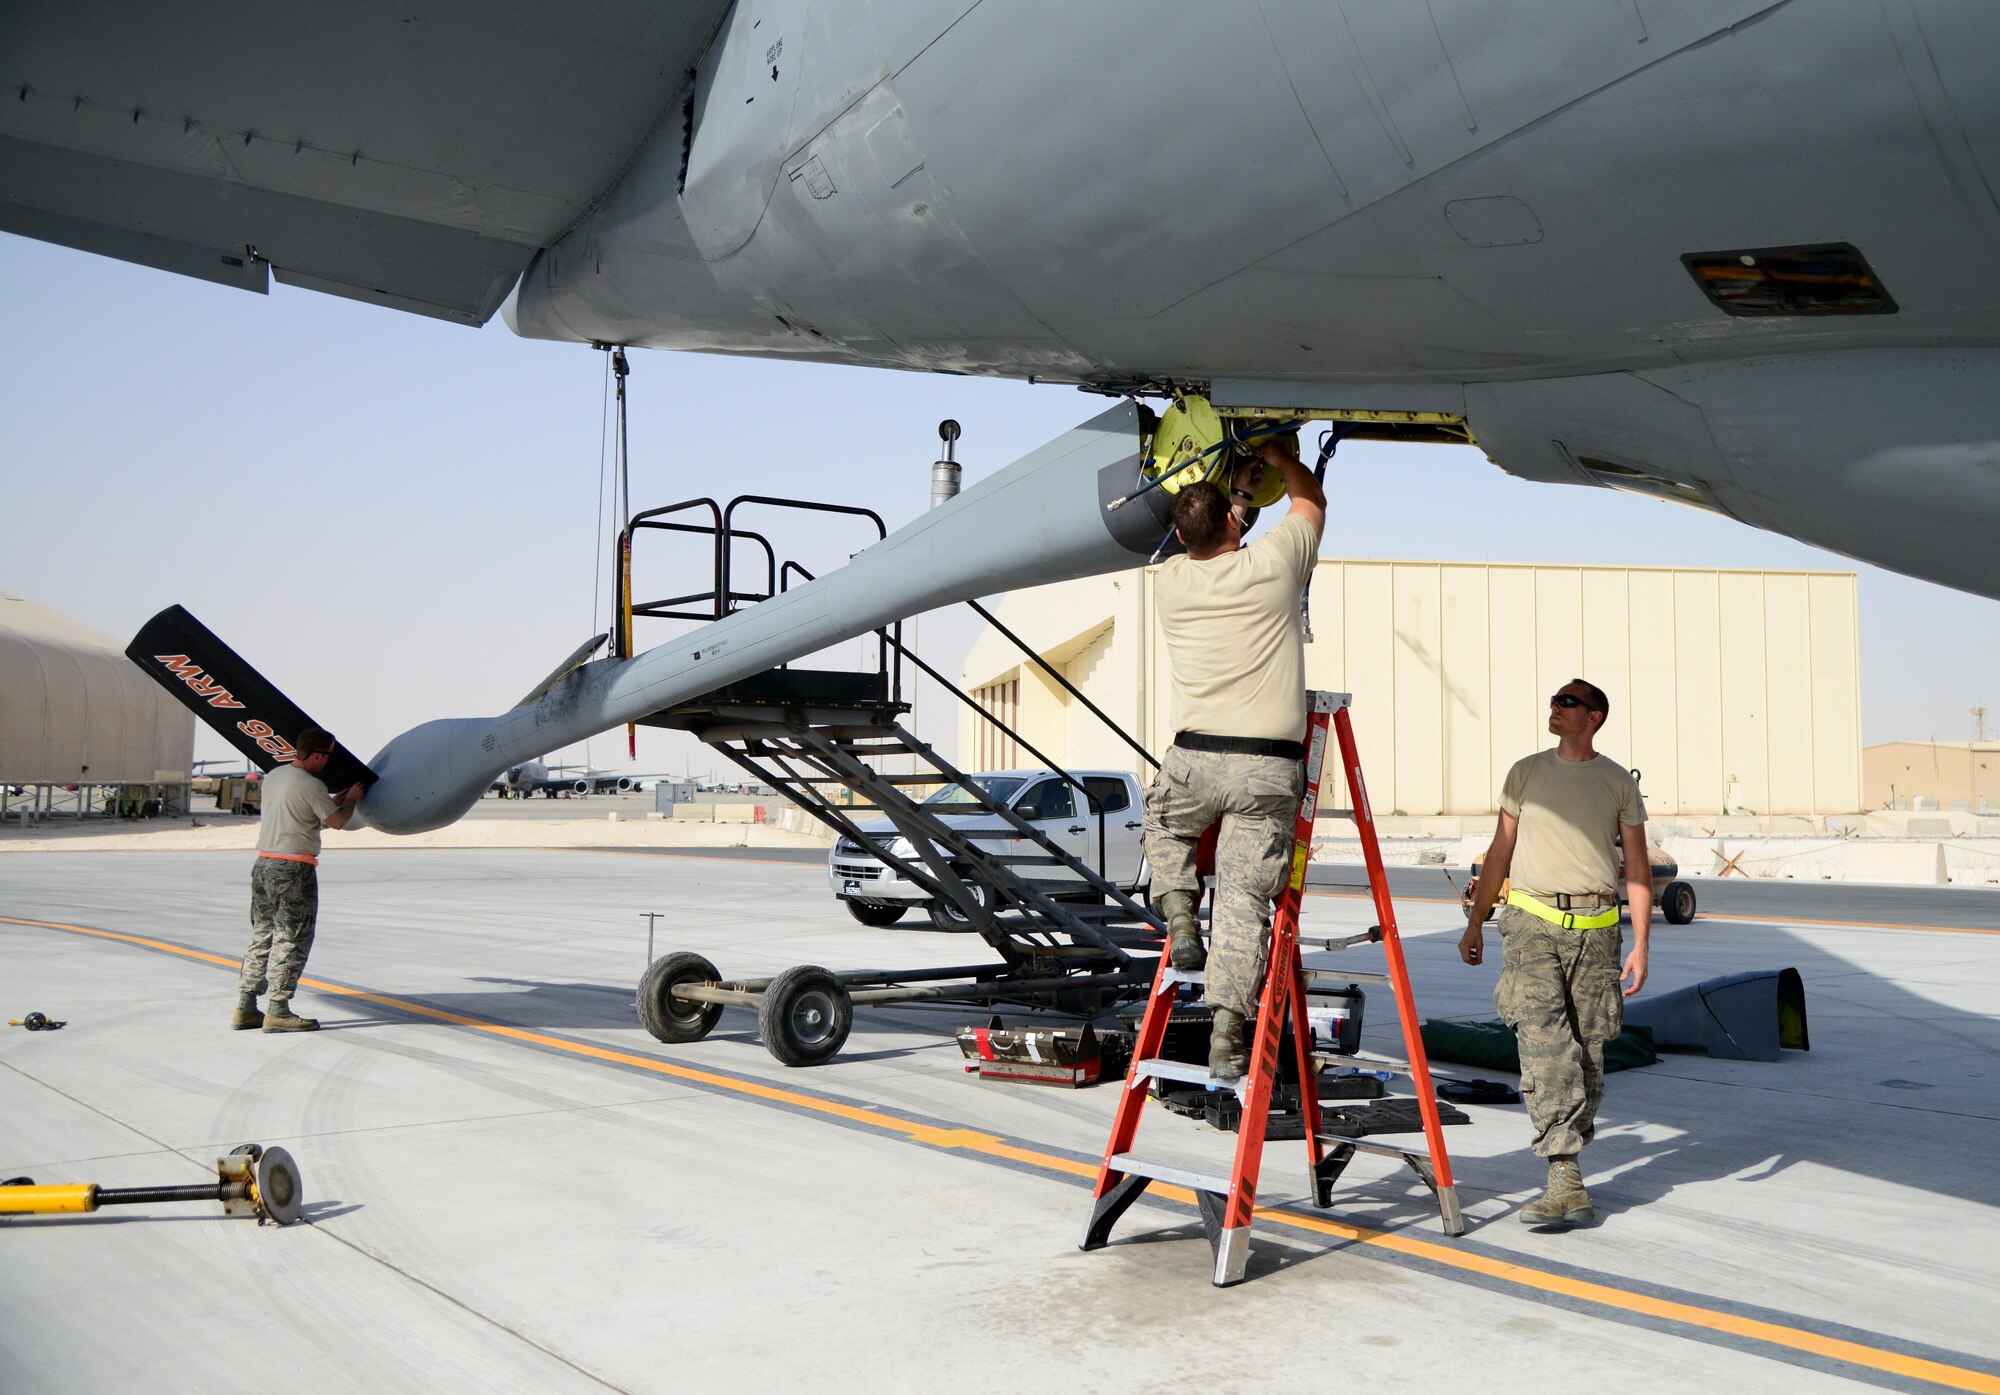 Airmen from the 340th Expeditionary Aircraft Maintenance Unit perform maintenance on a KC-135 Stratotanker, March 3, 2015, at Al Udeid Air Base, Qatar. To support the  growing need for combat air power in the region,  in 2014, both the 340th Expeditionary Air Refueling Squadron  and 340th EAMU doubled in both number of aircraft and personnel—a feat that could not have been accomplished without total force integration. (U.S. Air Force photo by Senior Airman Kia Atkins)